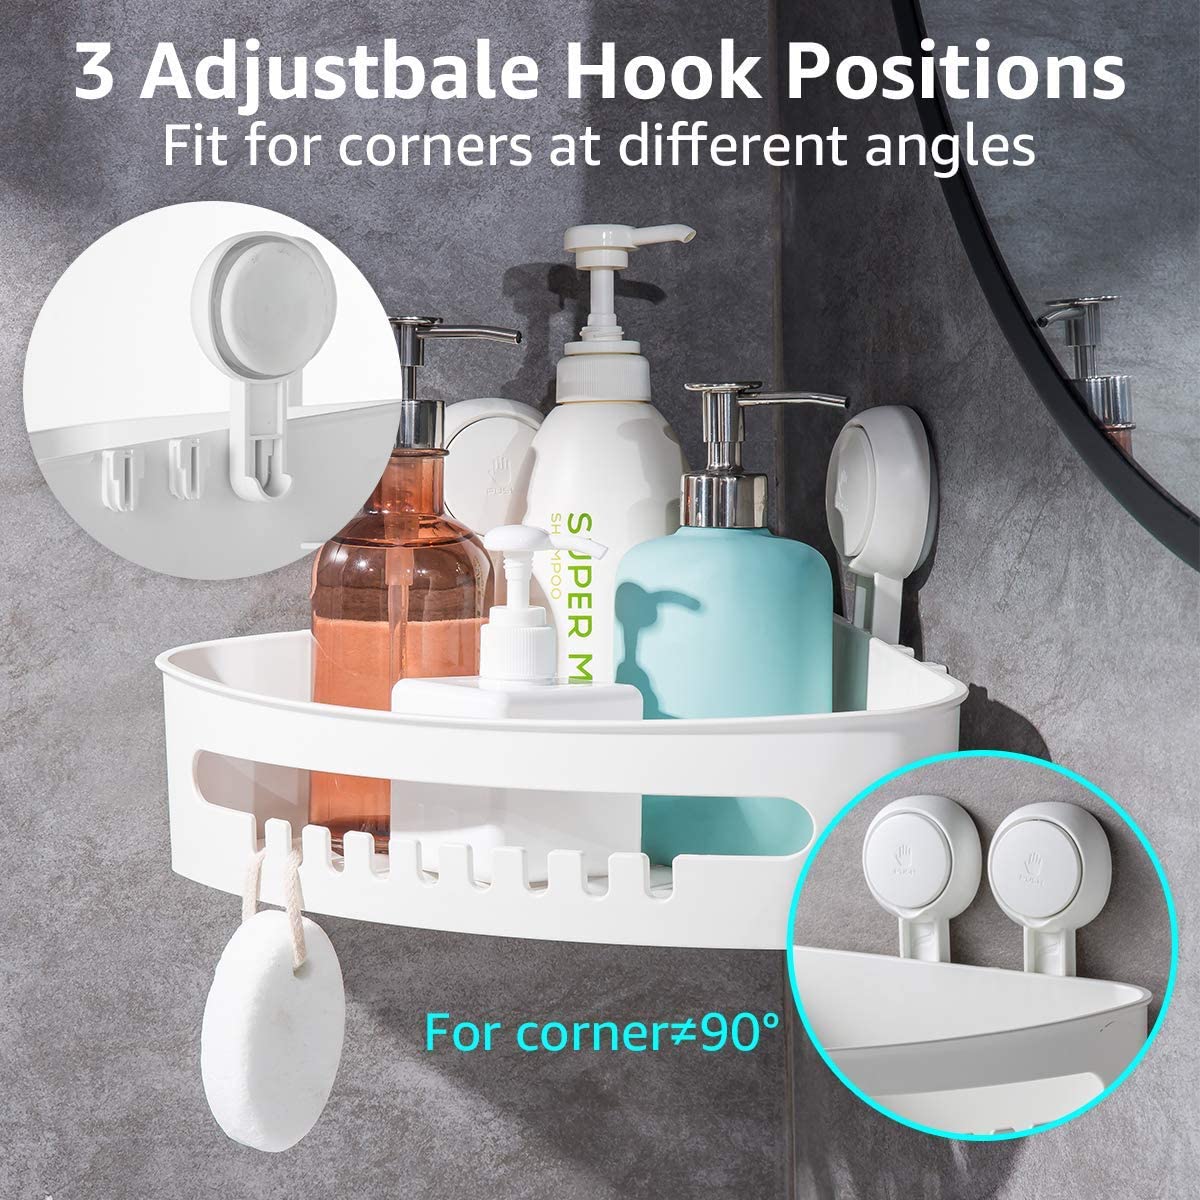 https://www.wideopencountry.com/wp-content/uploads/sites/4/2021/04/LEVERLOC-Corner-Shower-Caddy-Suction-Cup-NO-Drilling-Removable-Bathroom-Shower-Shelf-Heavy-Duty-Max-Hold-22lbs-Caddy-Organizer-Waterproof-Oilproof-Shower-Corner-Rack-for-Bathroom-Kitchen-White.jpg?resize=1200%2C1200